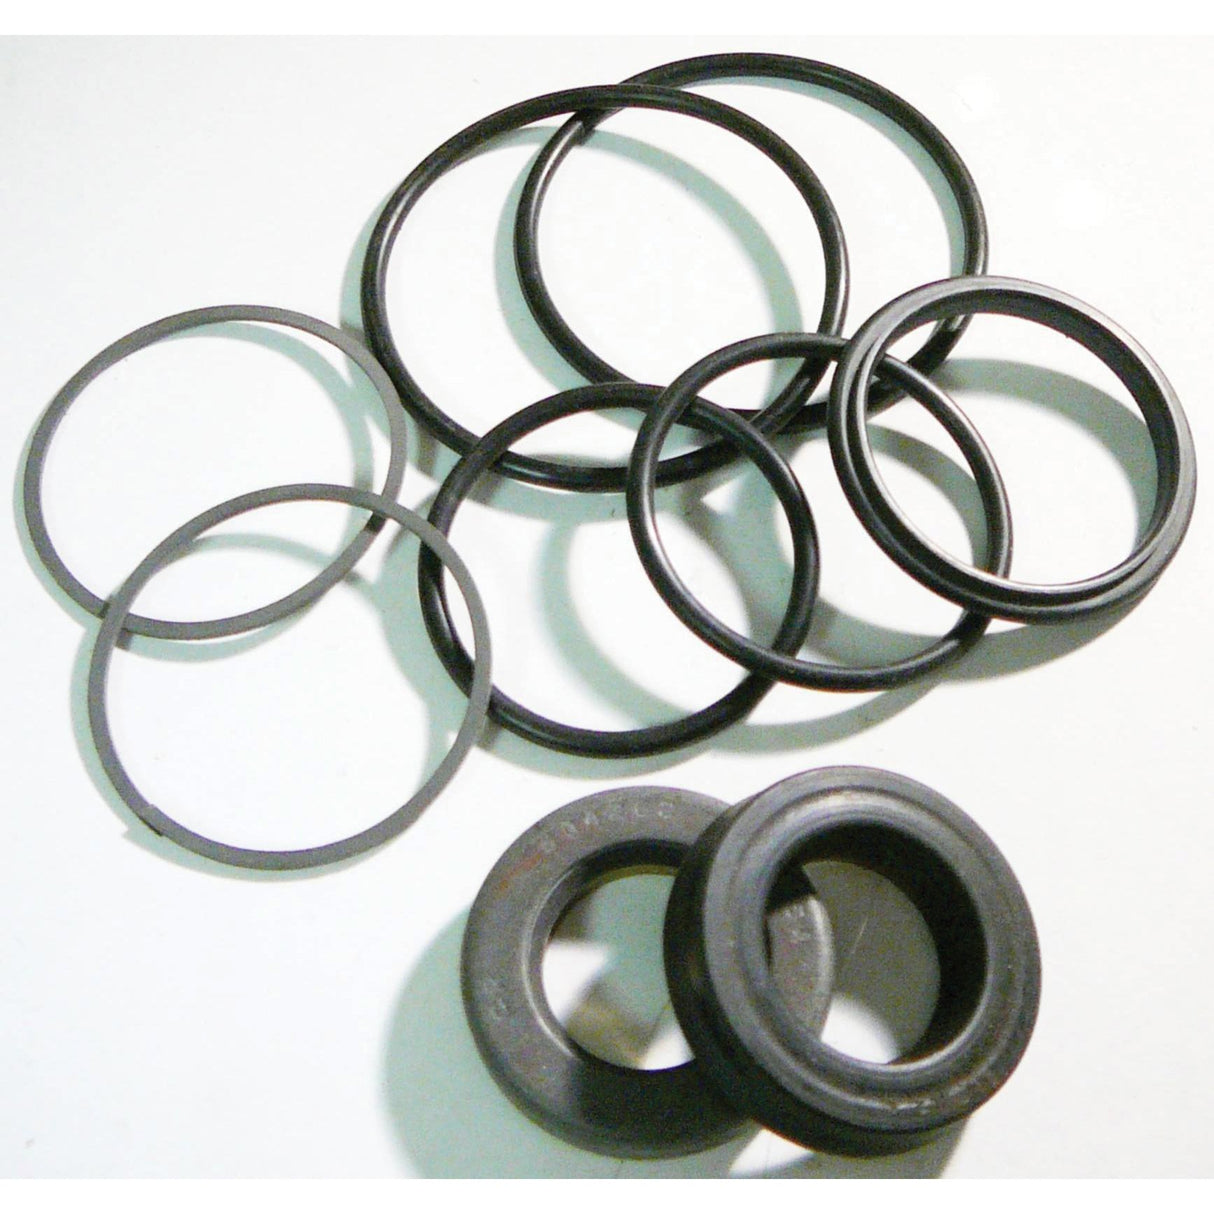 Power Steering Cylinder Seal Kit
 - S.61899 - Farming Parts